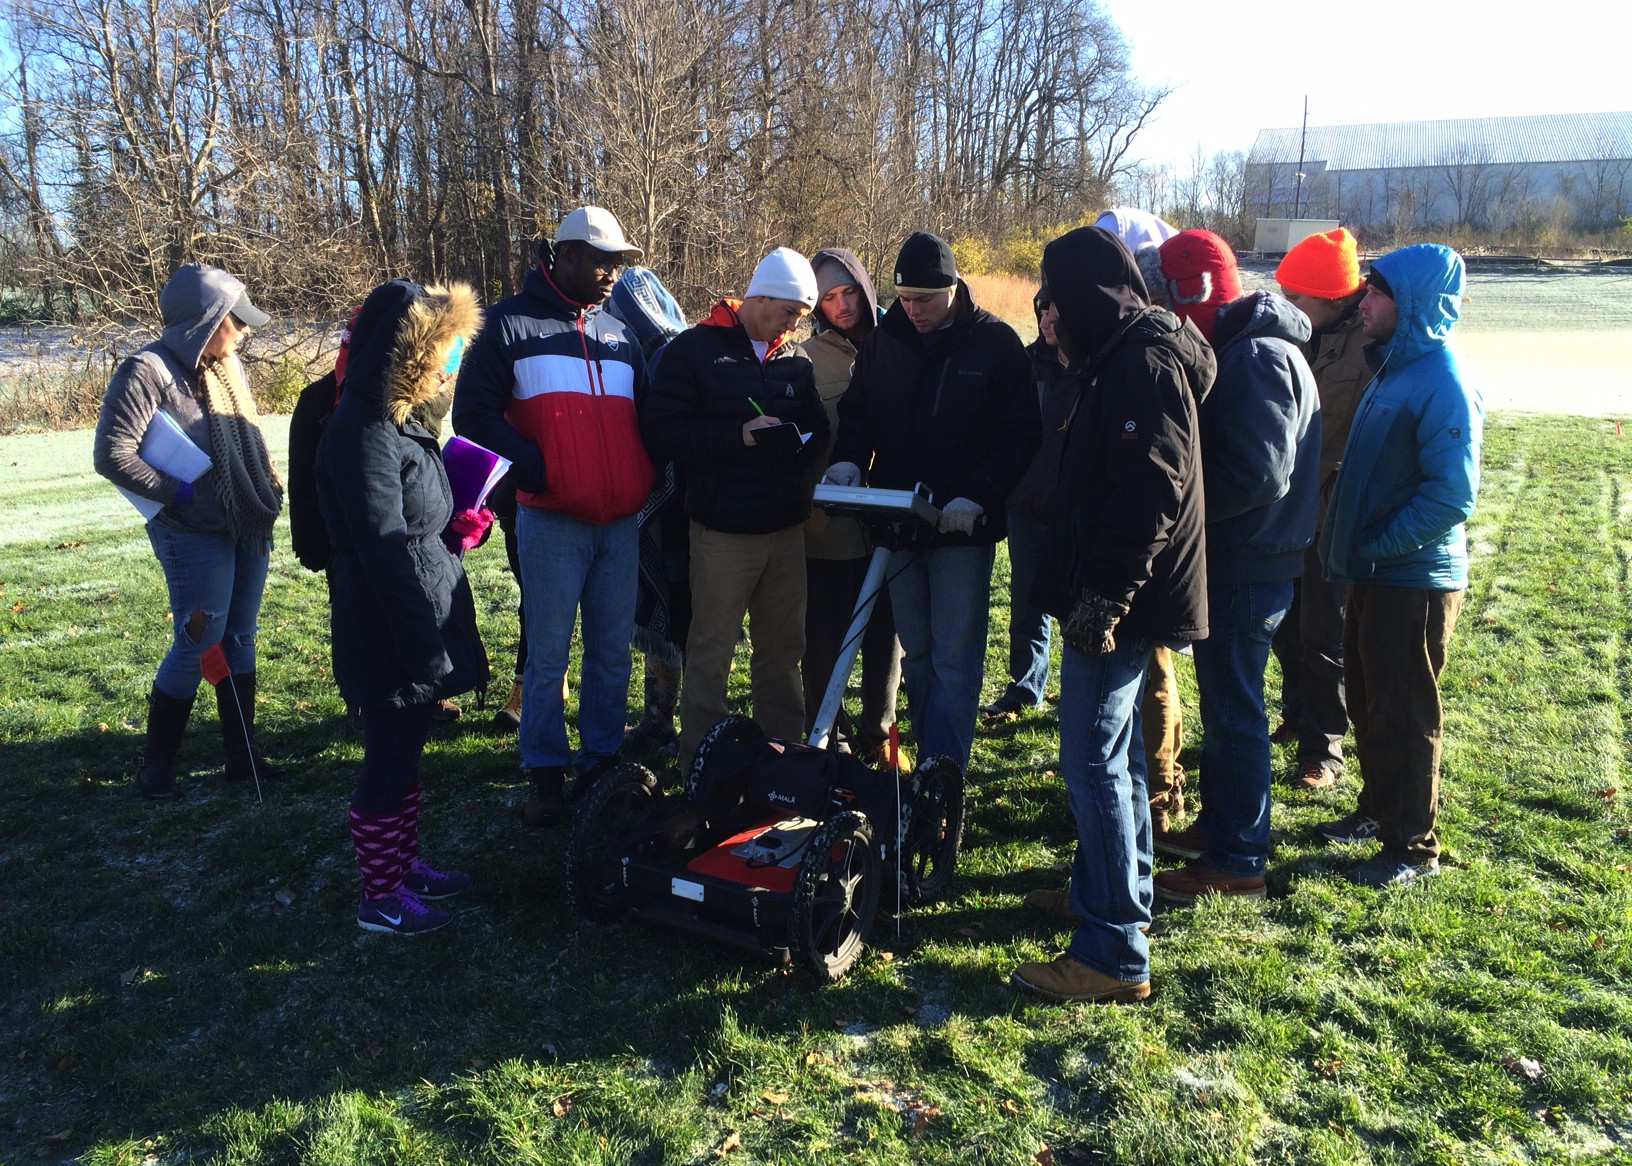 GEOS 380 Environmental Geophysics class mapping the subsurface features at the DePauw intramural field